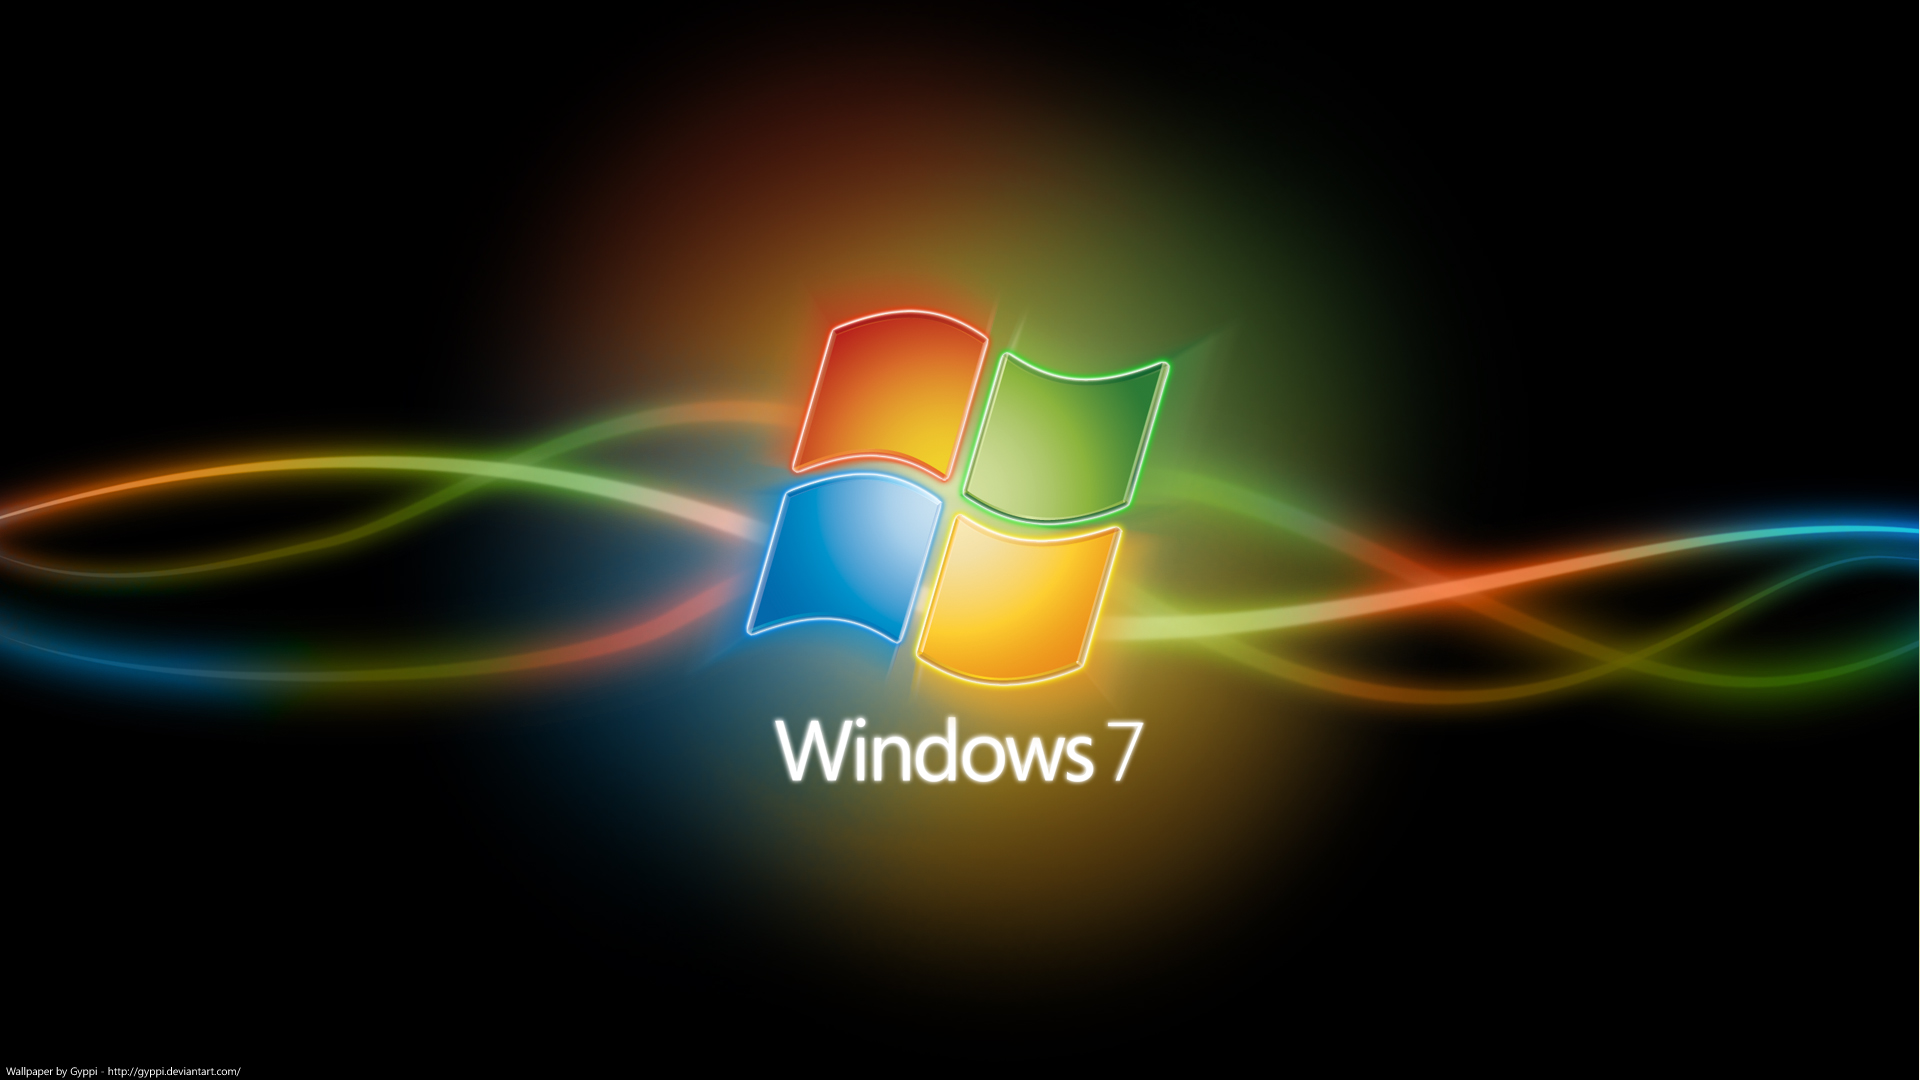 81 Windows 7 HD Wallpapers Backgrounds - Wallpaper Abyss